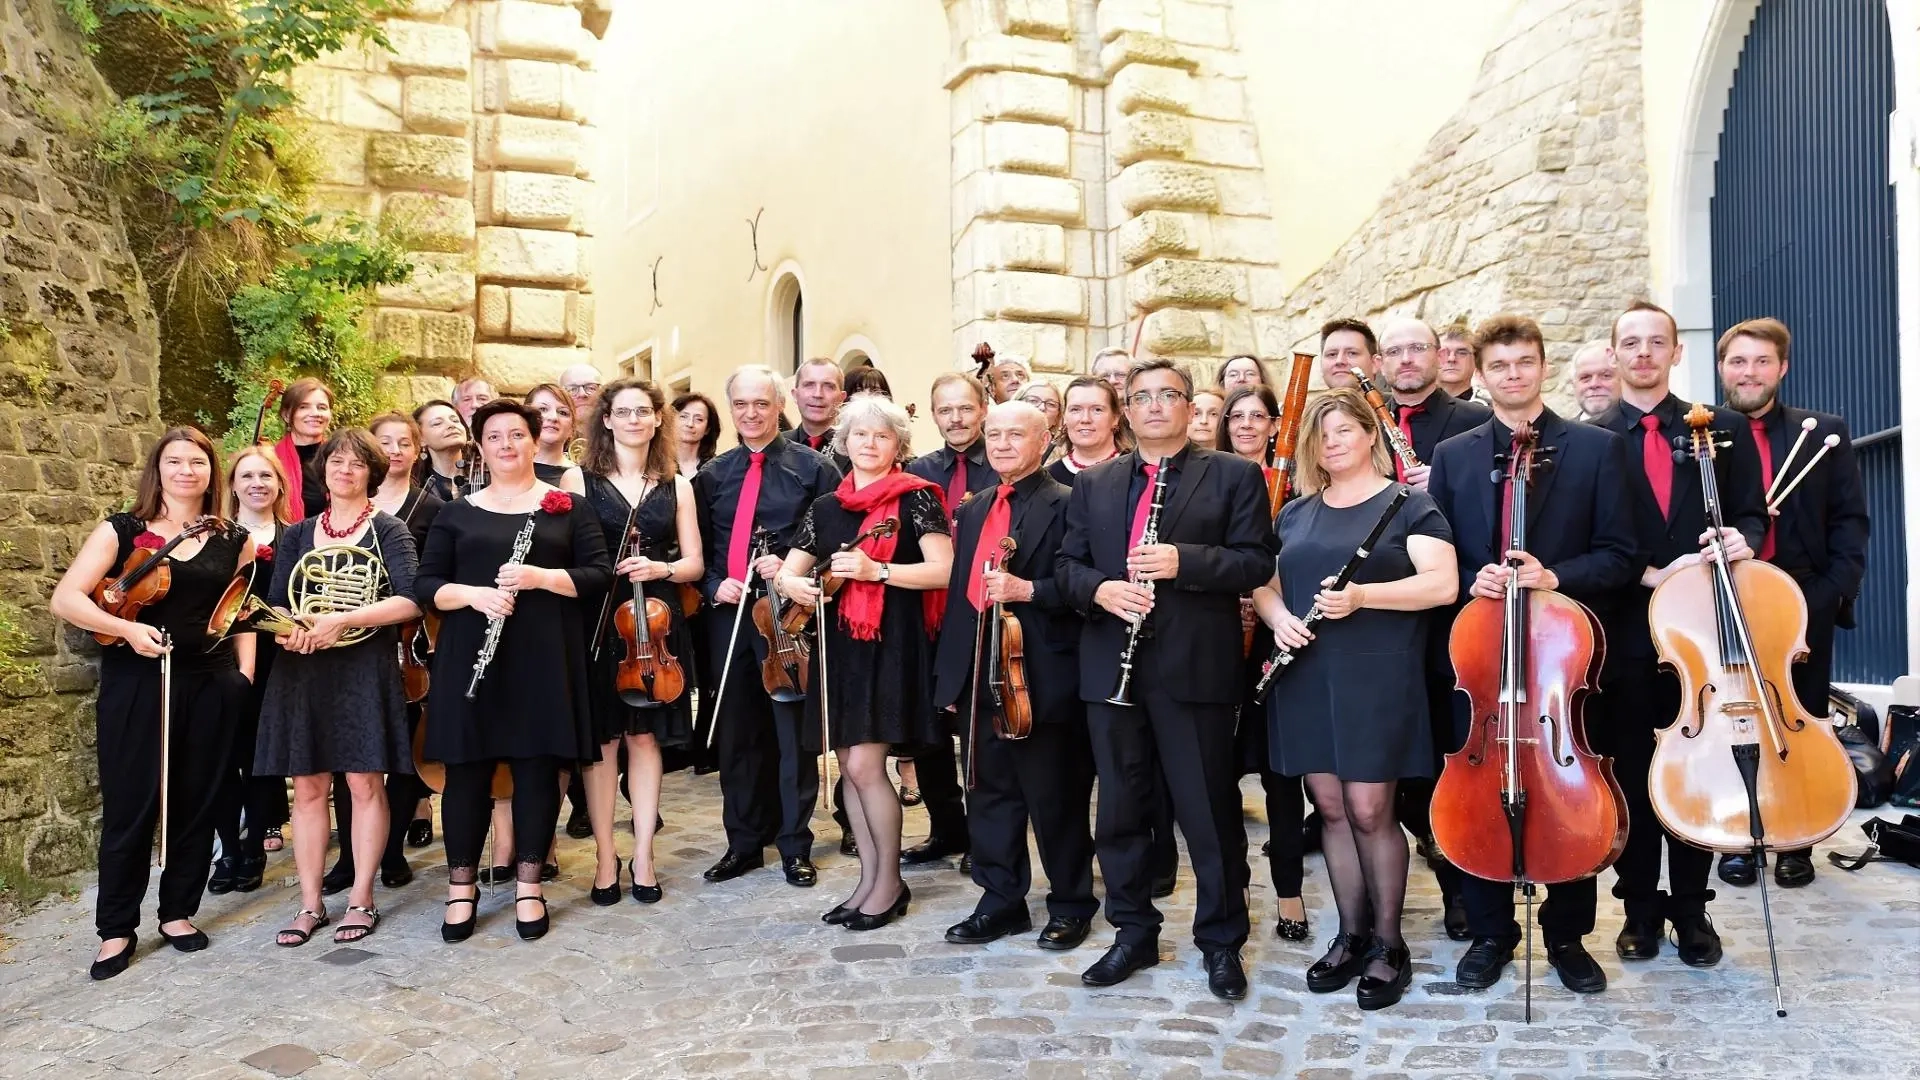 A part of the orchestra estro armonico is at the entrance of a castle in Luxembourg.